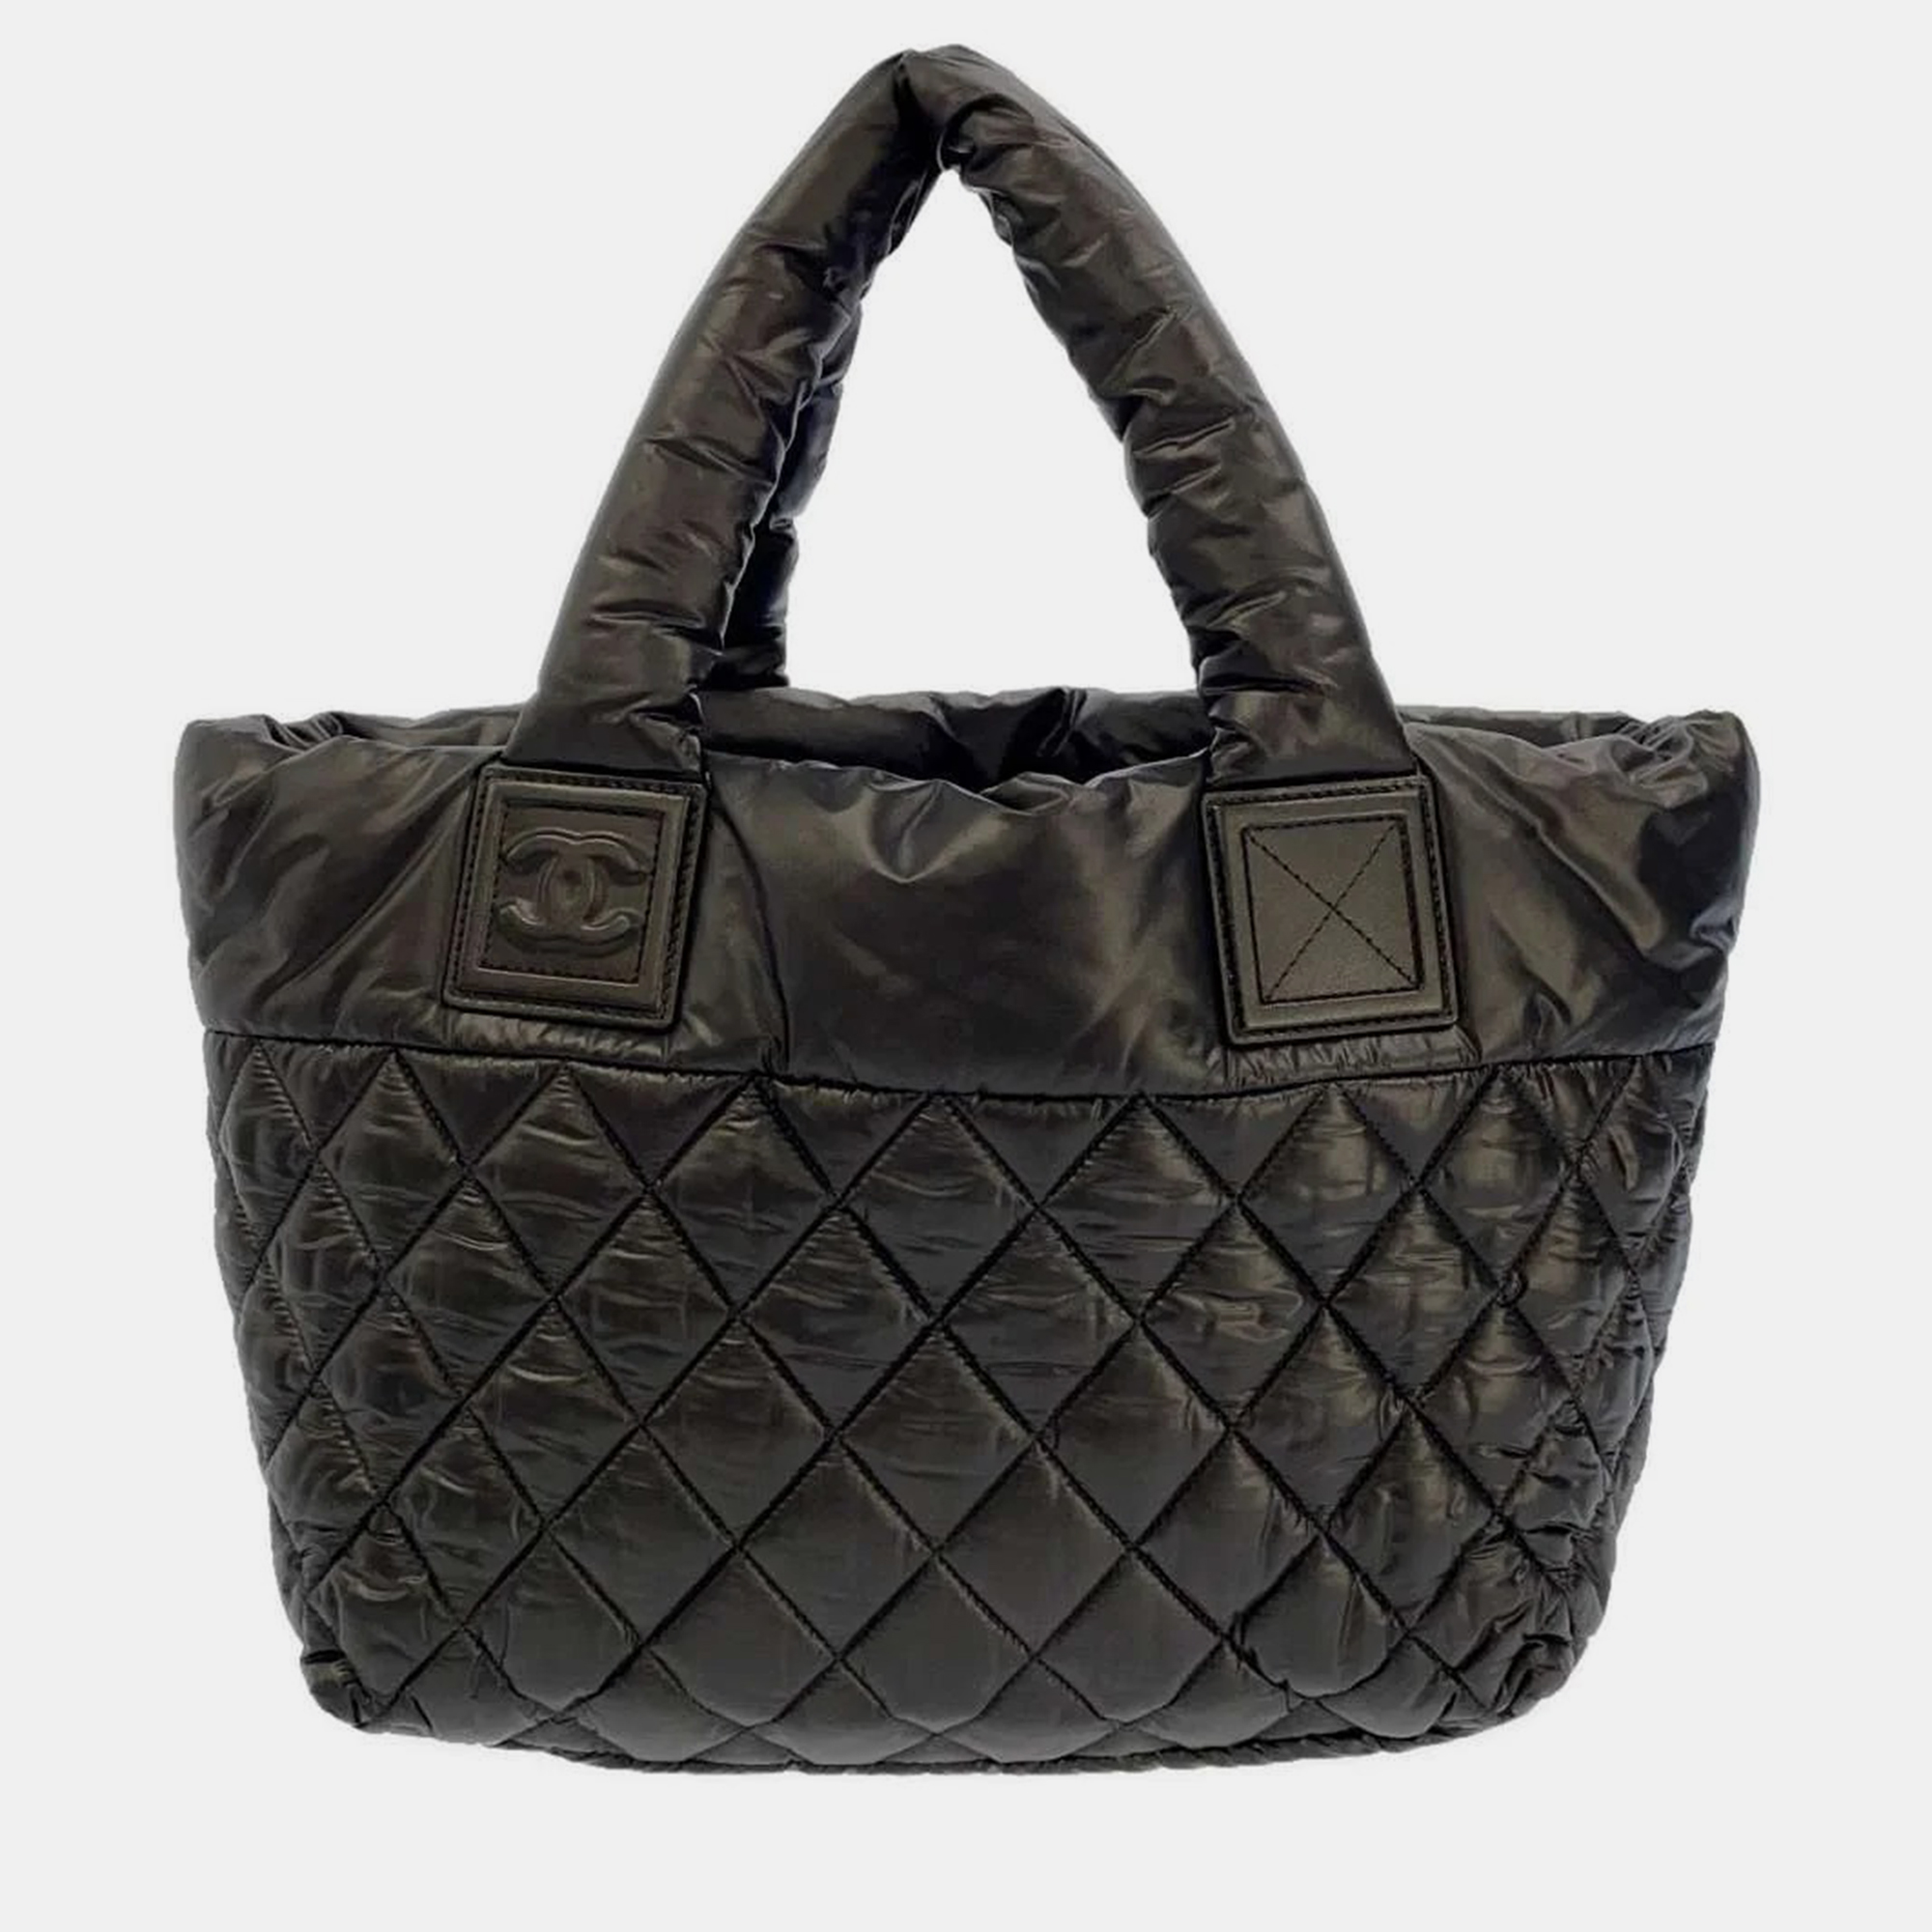 Chanel Black Leather Coco Cocoon Bag